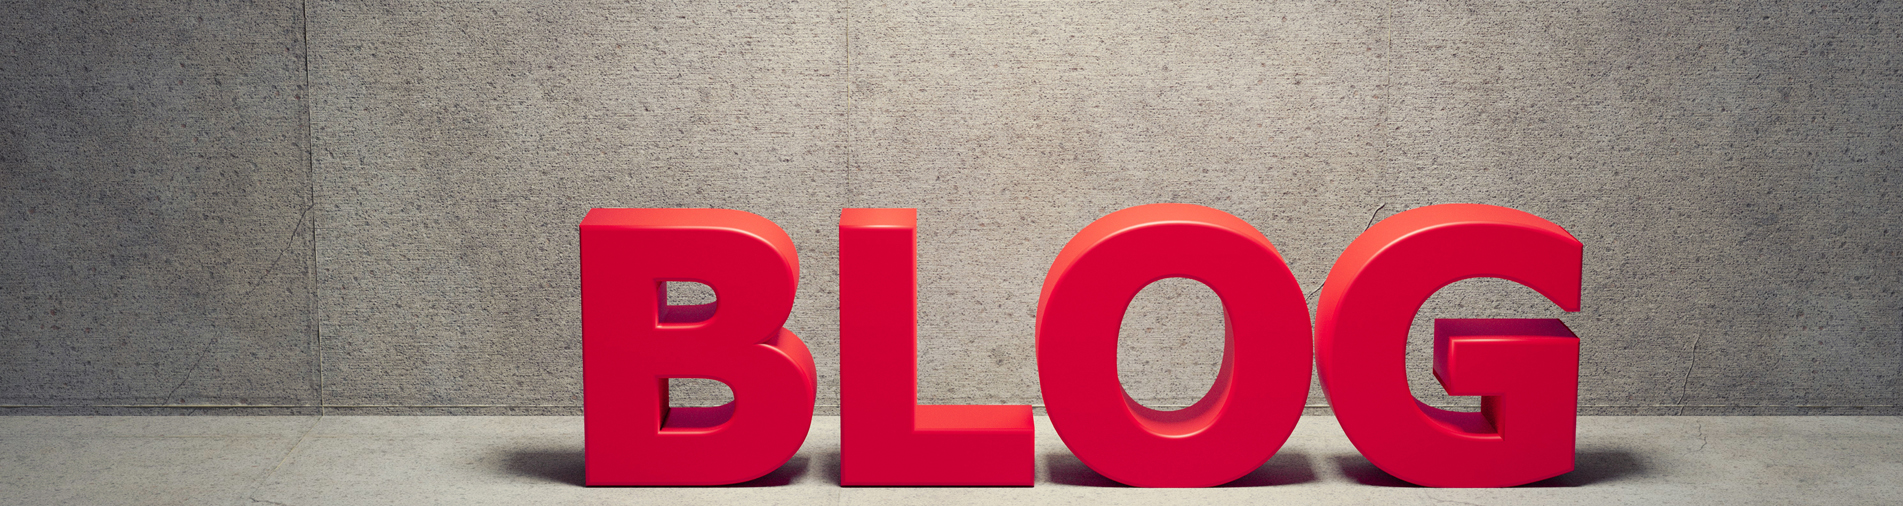 Eleven Important Tips on Optimizing Your Blog Posts for SEO